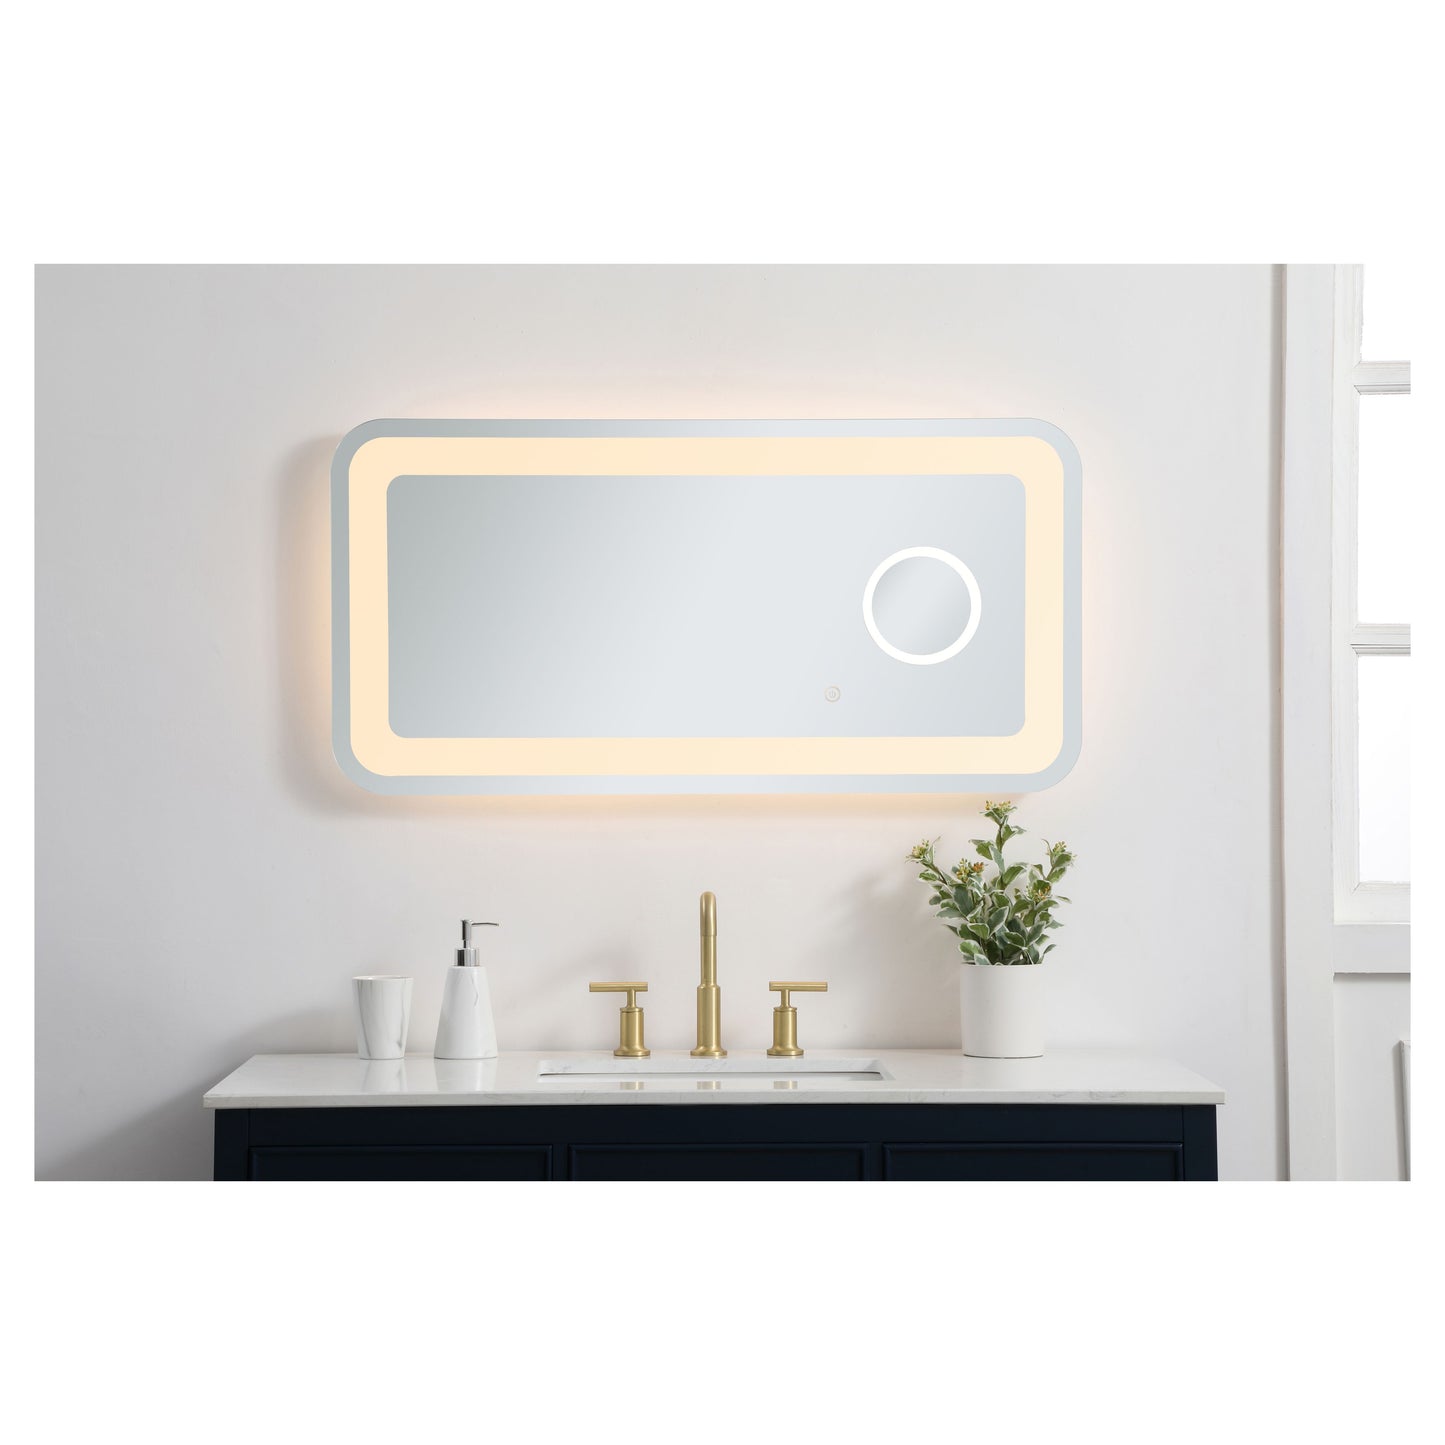 MRE52040 Lux 40" x 20" LED Mirror in Glossy White - Adjustable Color Temp